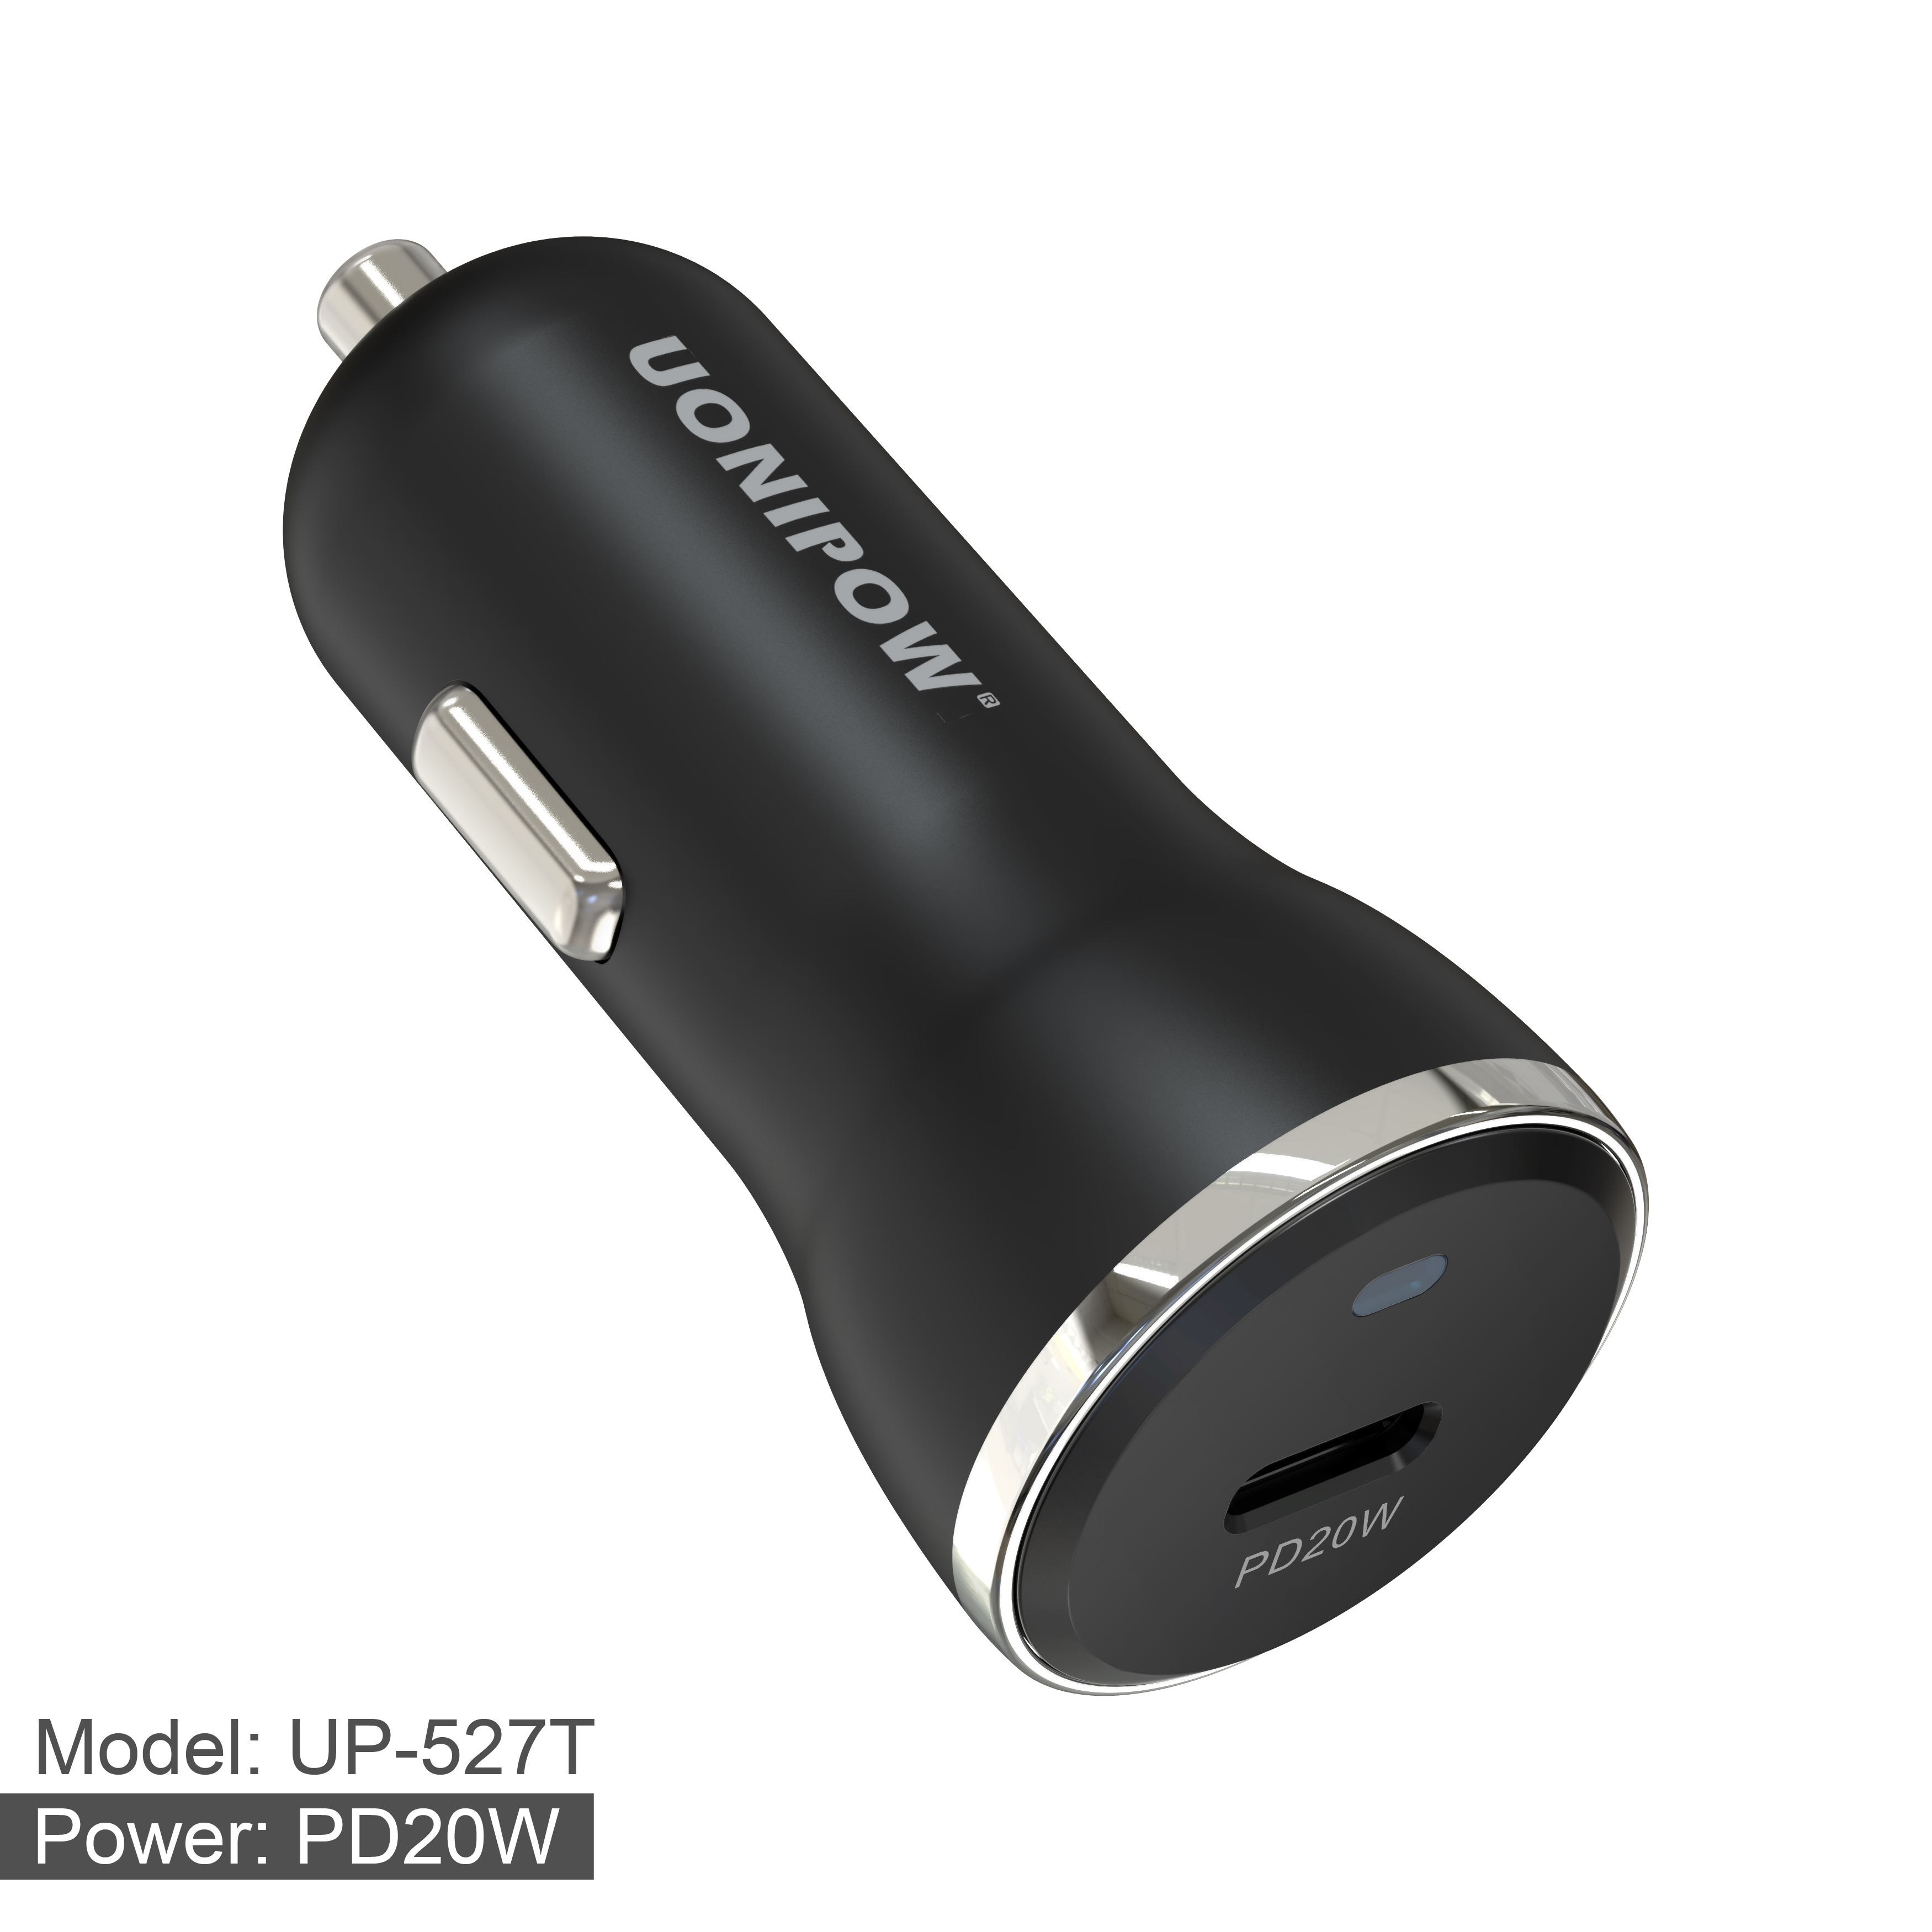 PD20W A + C car charger Manufacturers, PD20W A + C car charger Factory, Supply PD20W A + C car charger